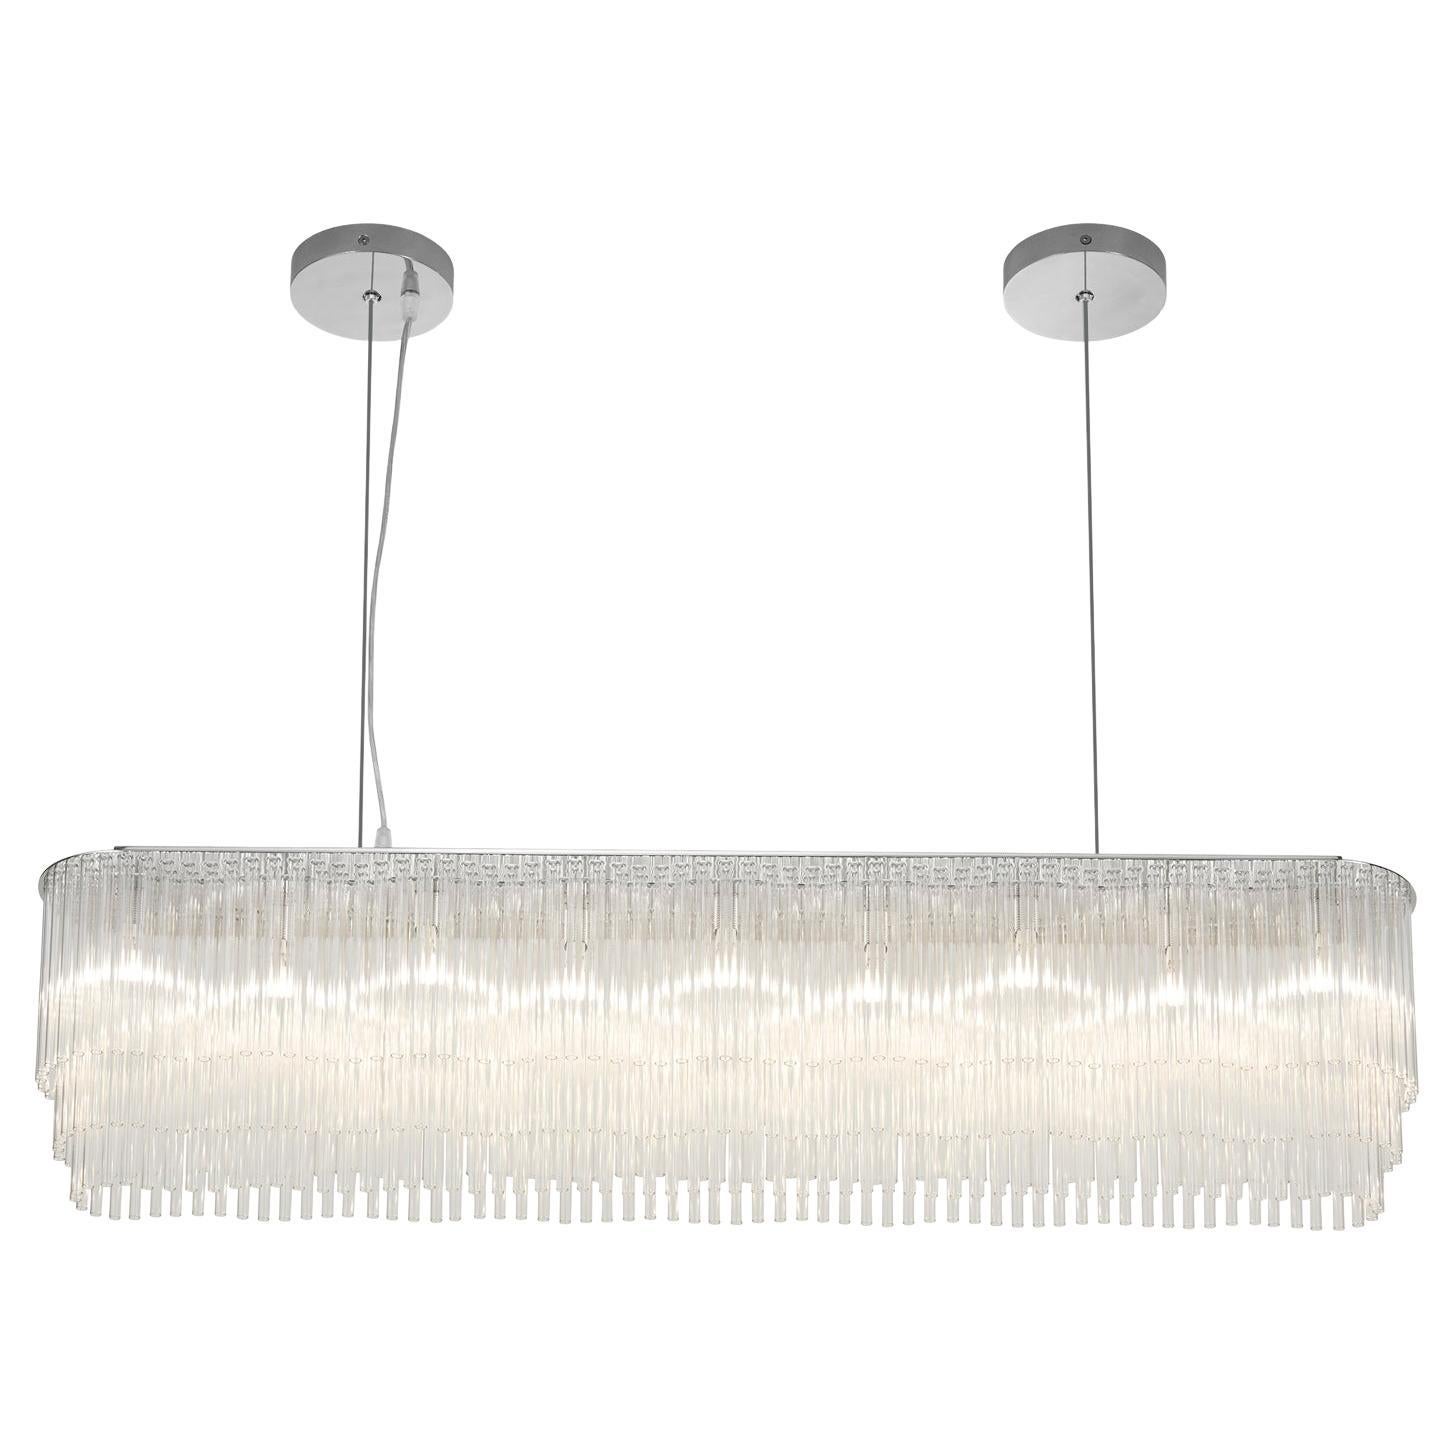 Linear Chandelier Thin 1445mm/58.75"  in Brushed Nickel / Tiered Glass Profile For Sale